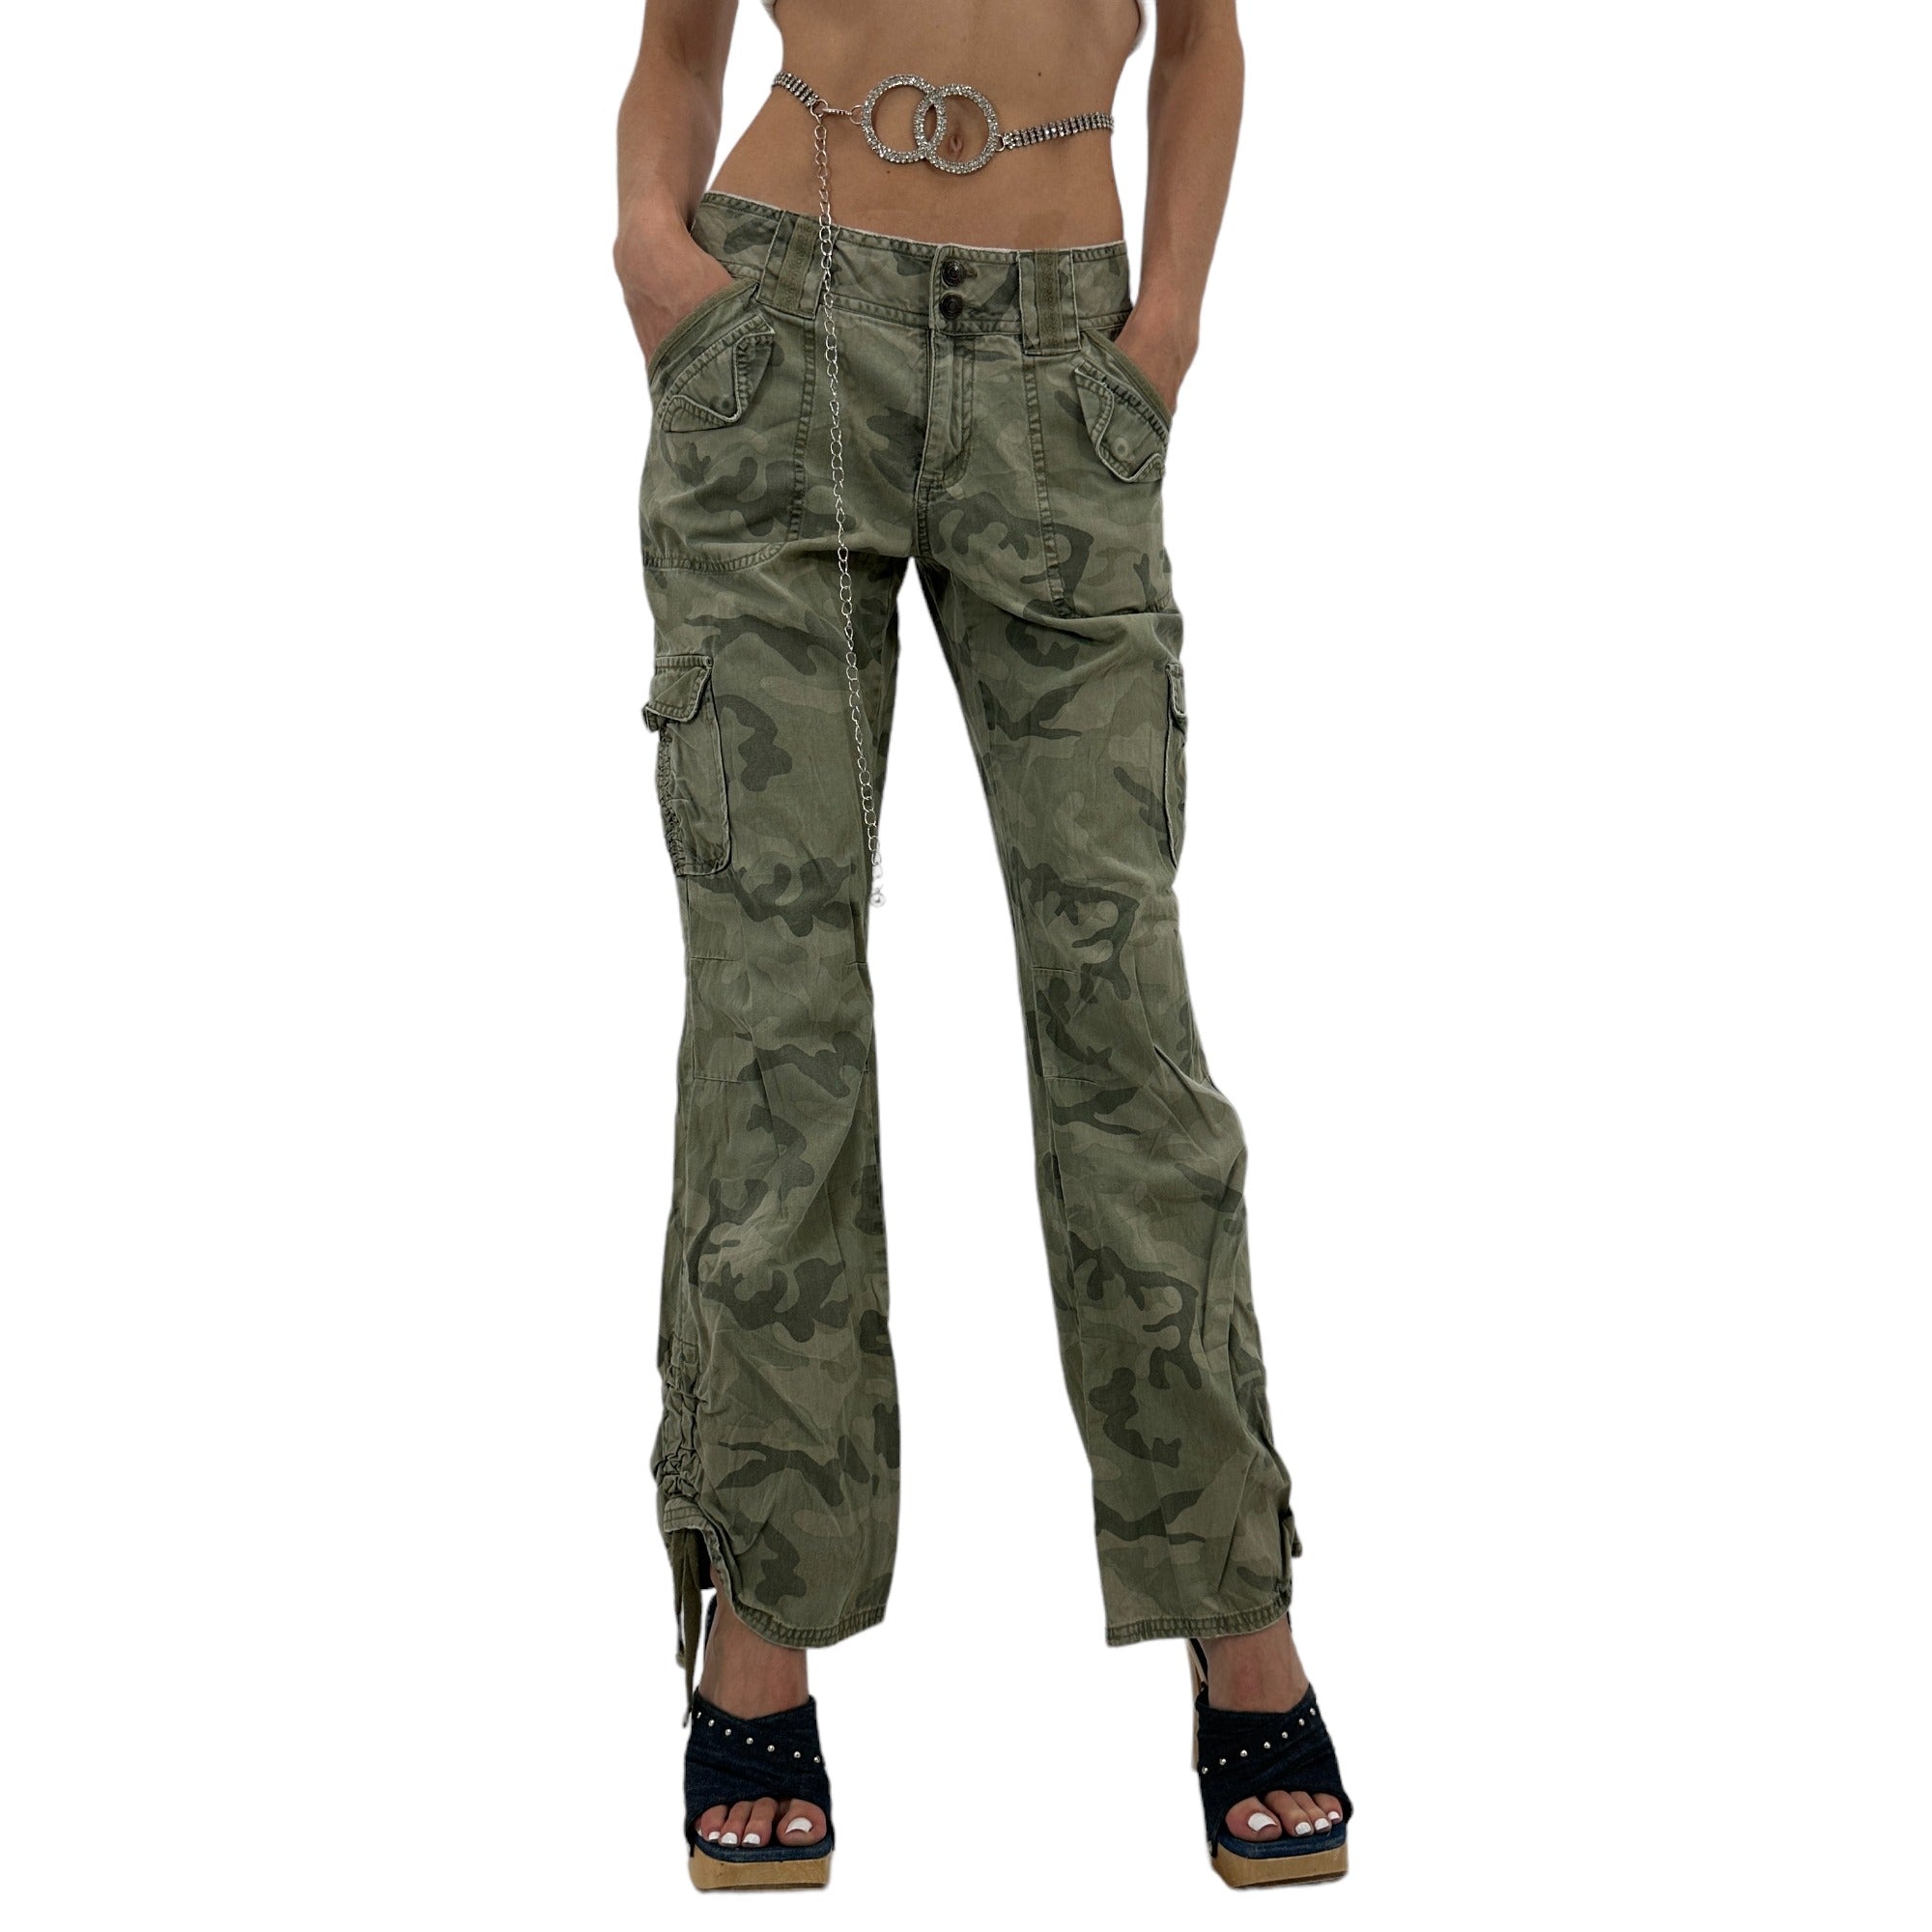 Y2k Vintage Green Camouflage Cargo Pants [XS]